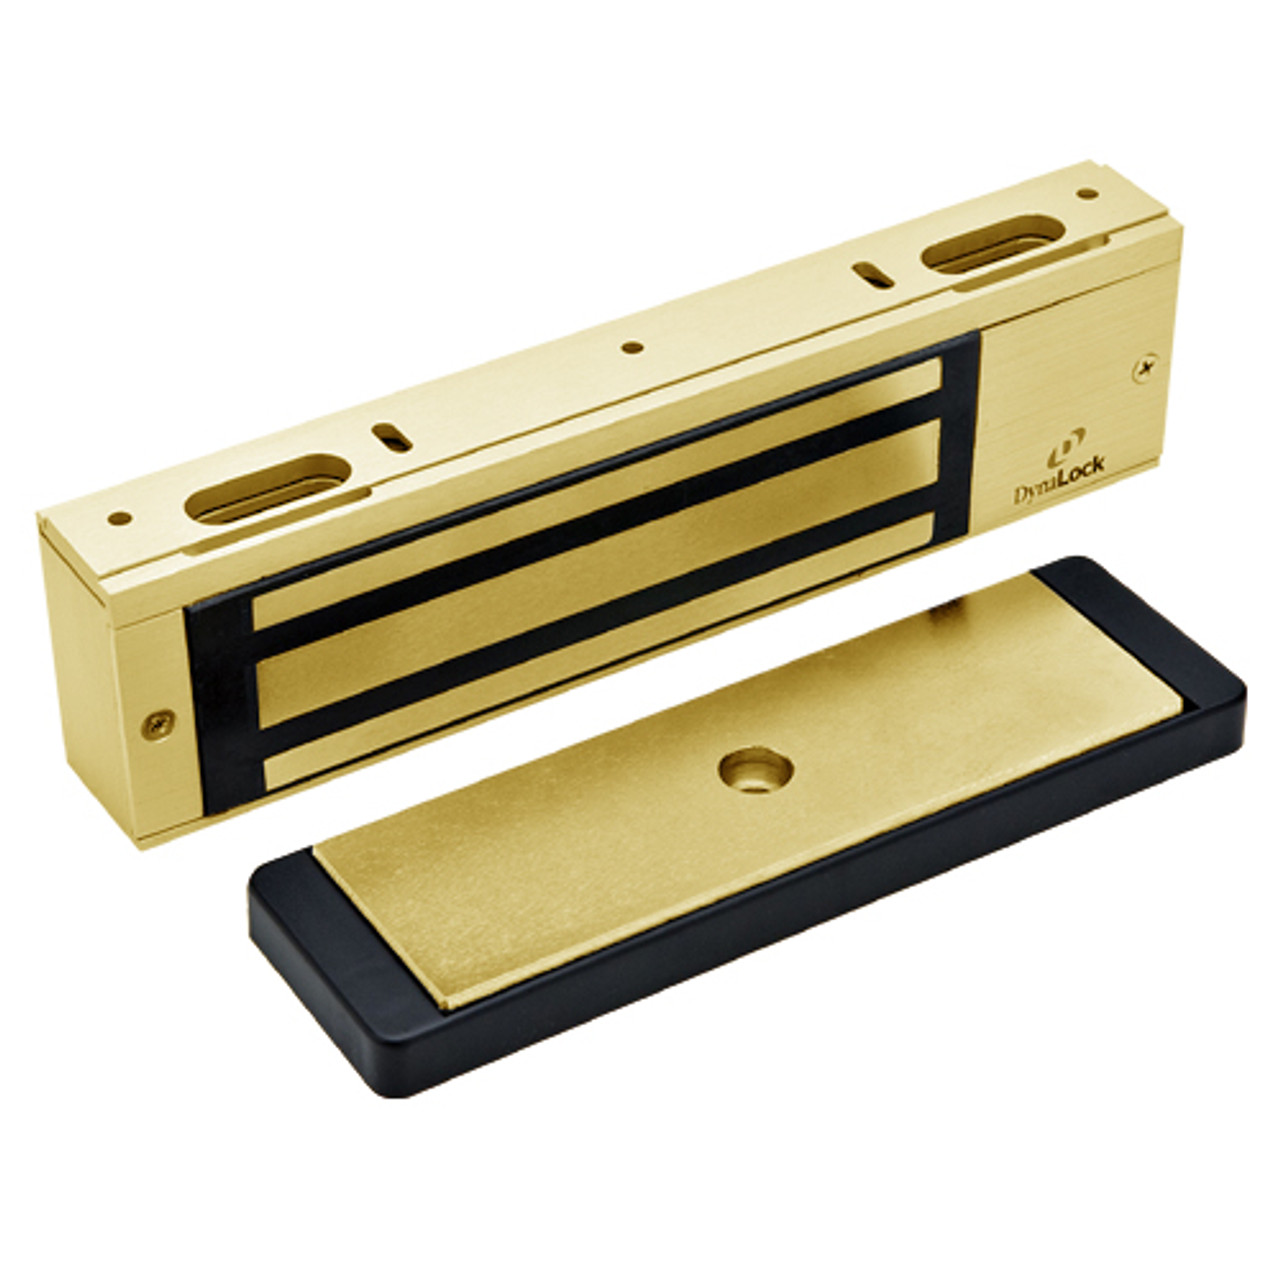 3000TJ30-US3-VOP DynaLock 3000 Series 1500 LBs Single Electromagnetic Lock for Inswing Door with Value Option Package in Bright Brass